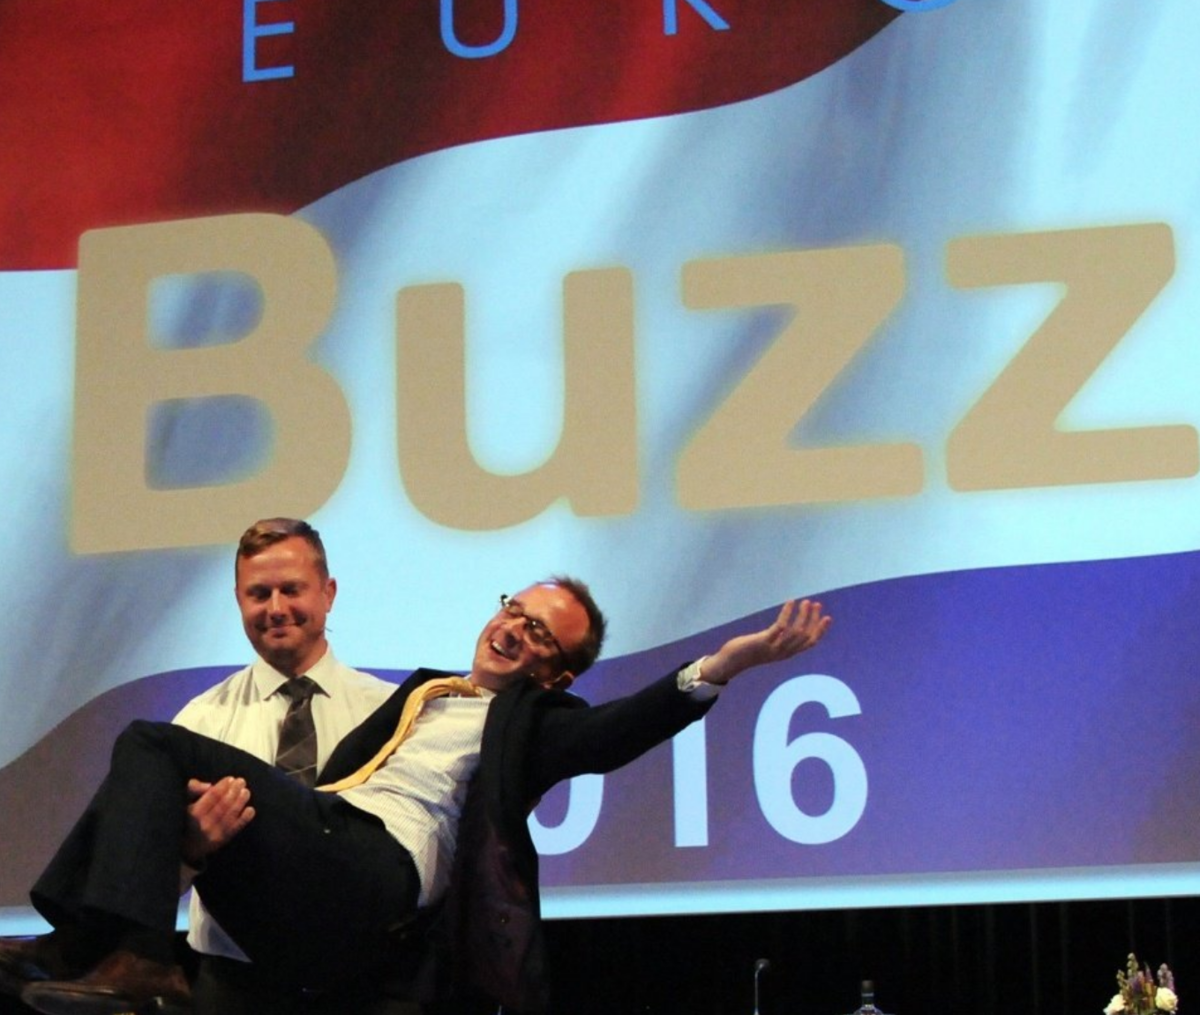 Jeff and Ed offered their on-stage roundup, EuroBuzz 2016  